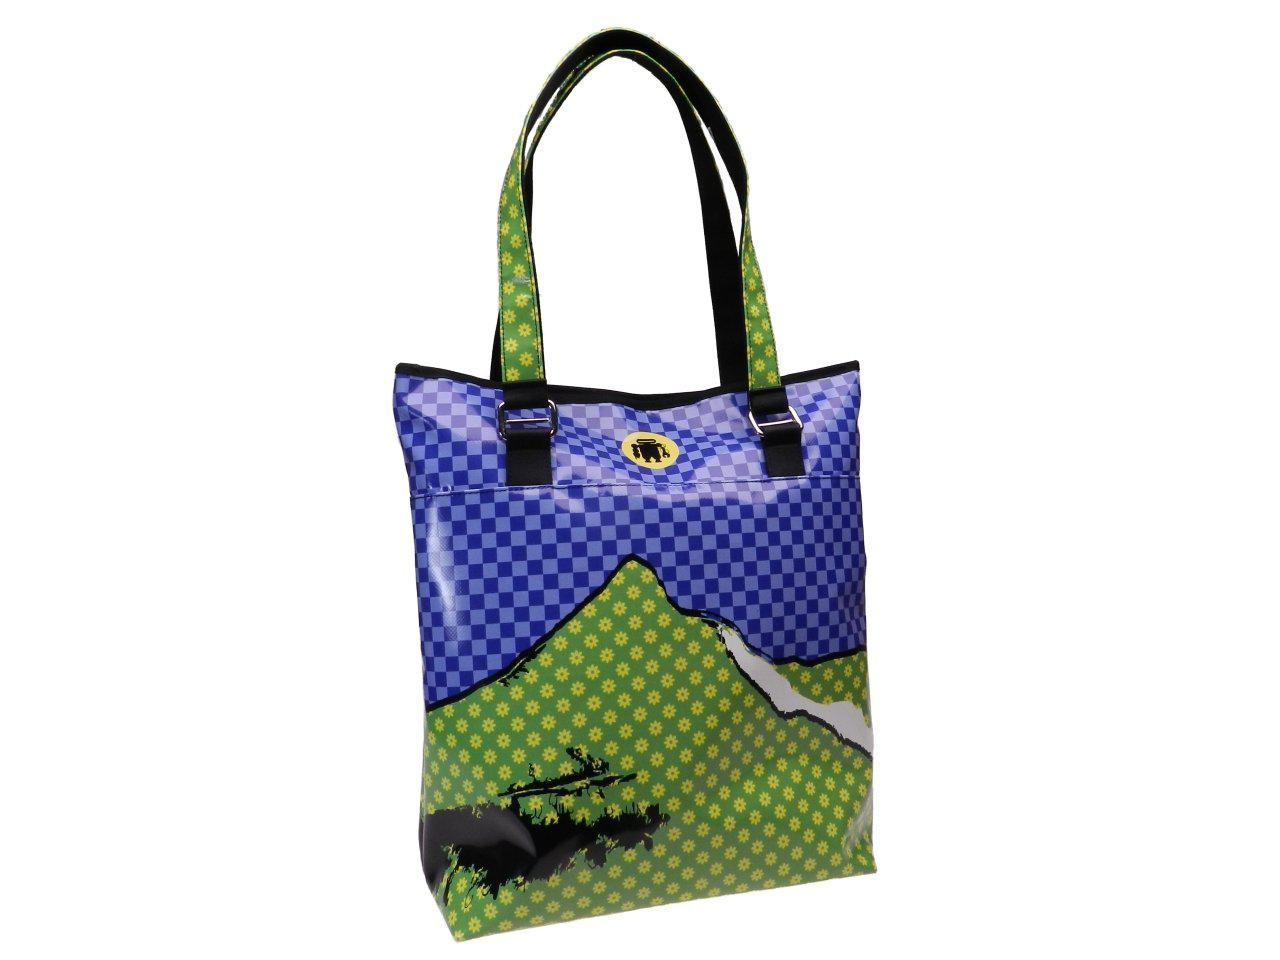 MAXI SHOPPER "DISCOVER SIBILLINI" BLACK, BLUE AND GREEN COLOUR WITH 'MONTE SIBILLA' PRINT. MODEL SELZ MADE OF LORRY TARPAULIN. - Limited Edition Paul Meccanico